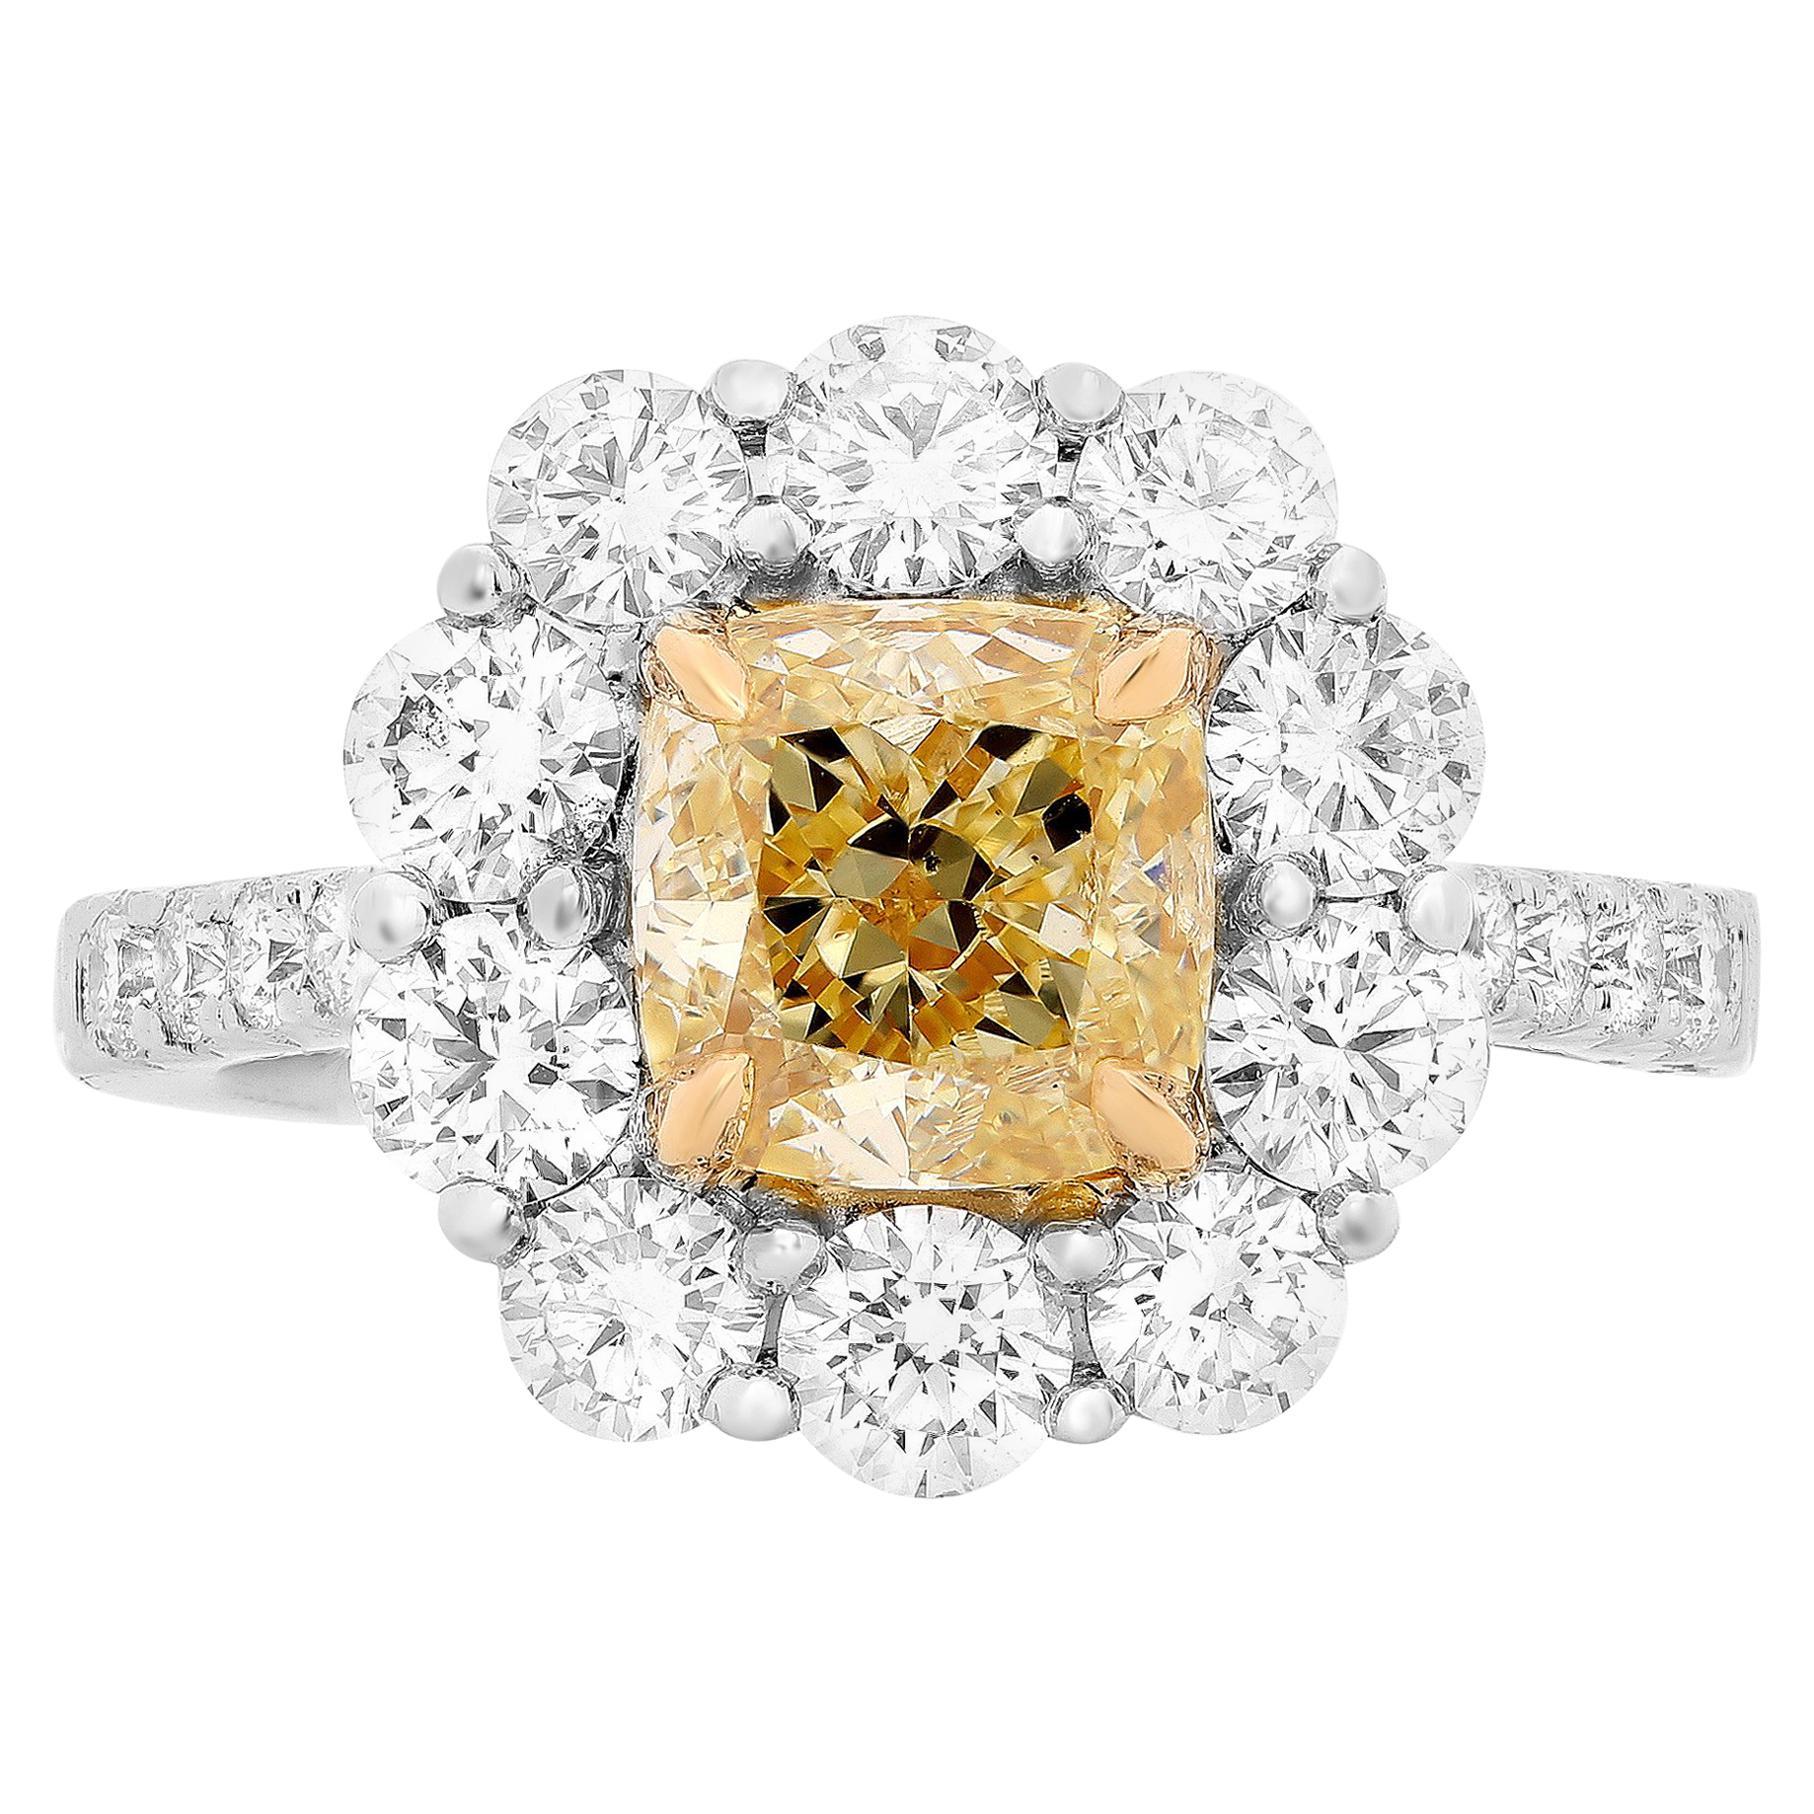 2.01 Carat GIA Certified Fancy Yellow Diamond Ring For Sale